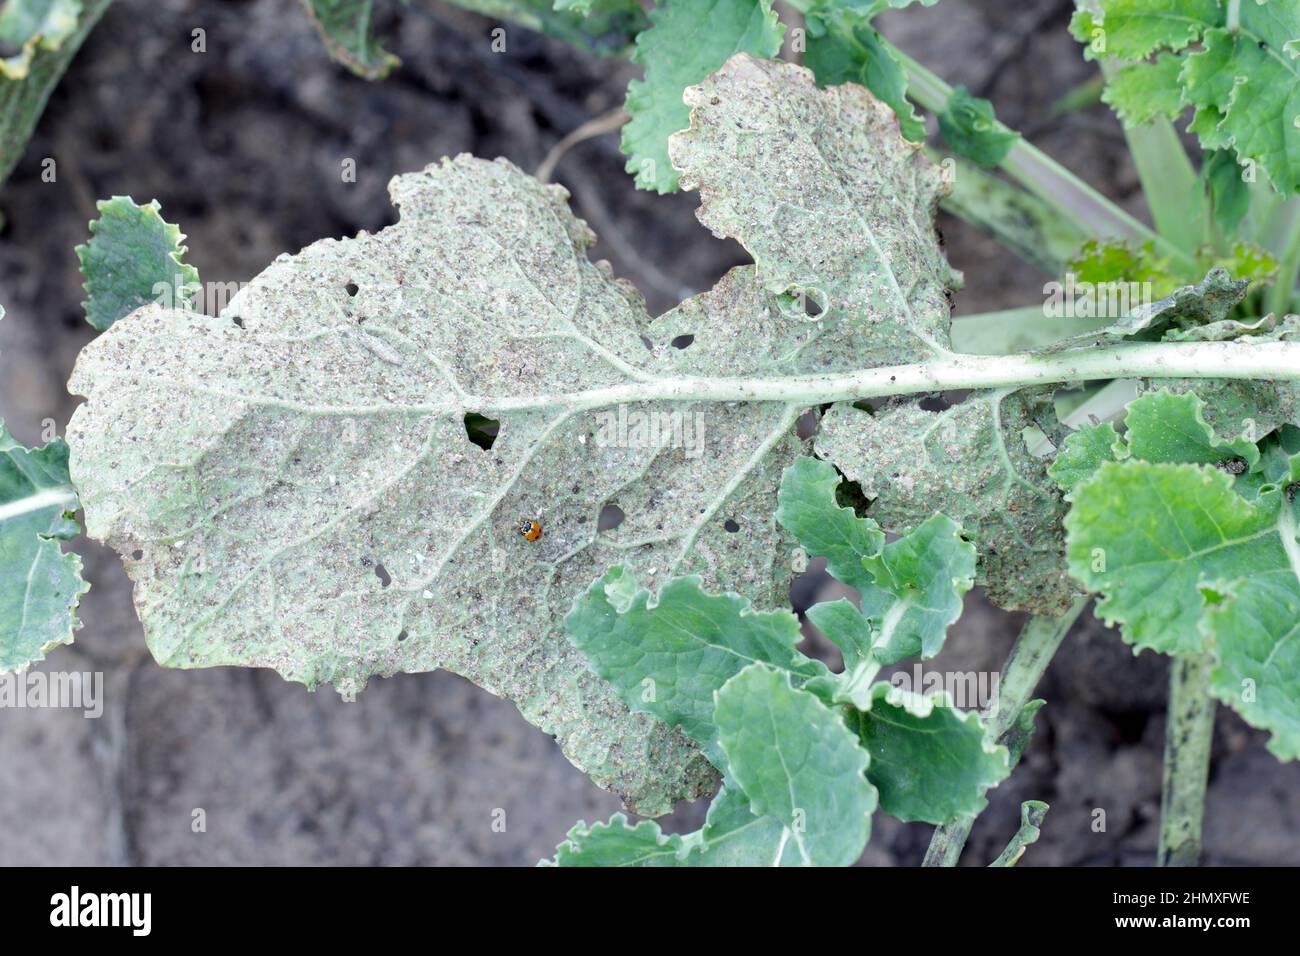 A turnip leaf heavily damaged by whitefly. The entire underside of the leaf is covered with insects. Stock Photo